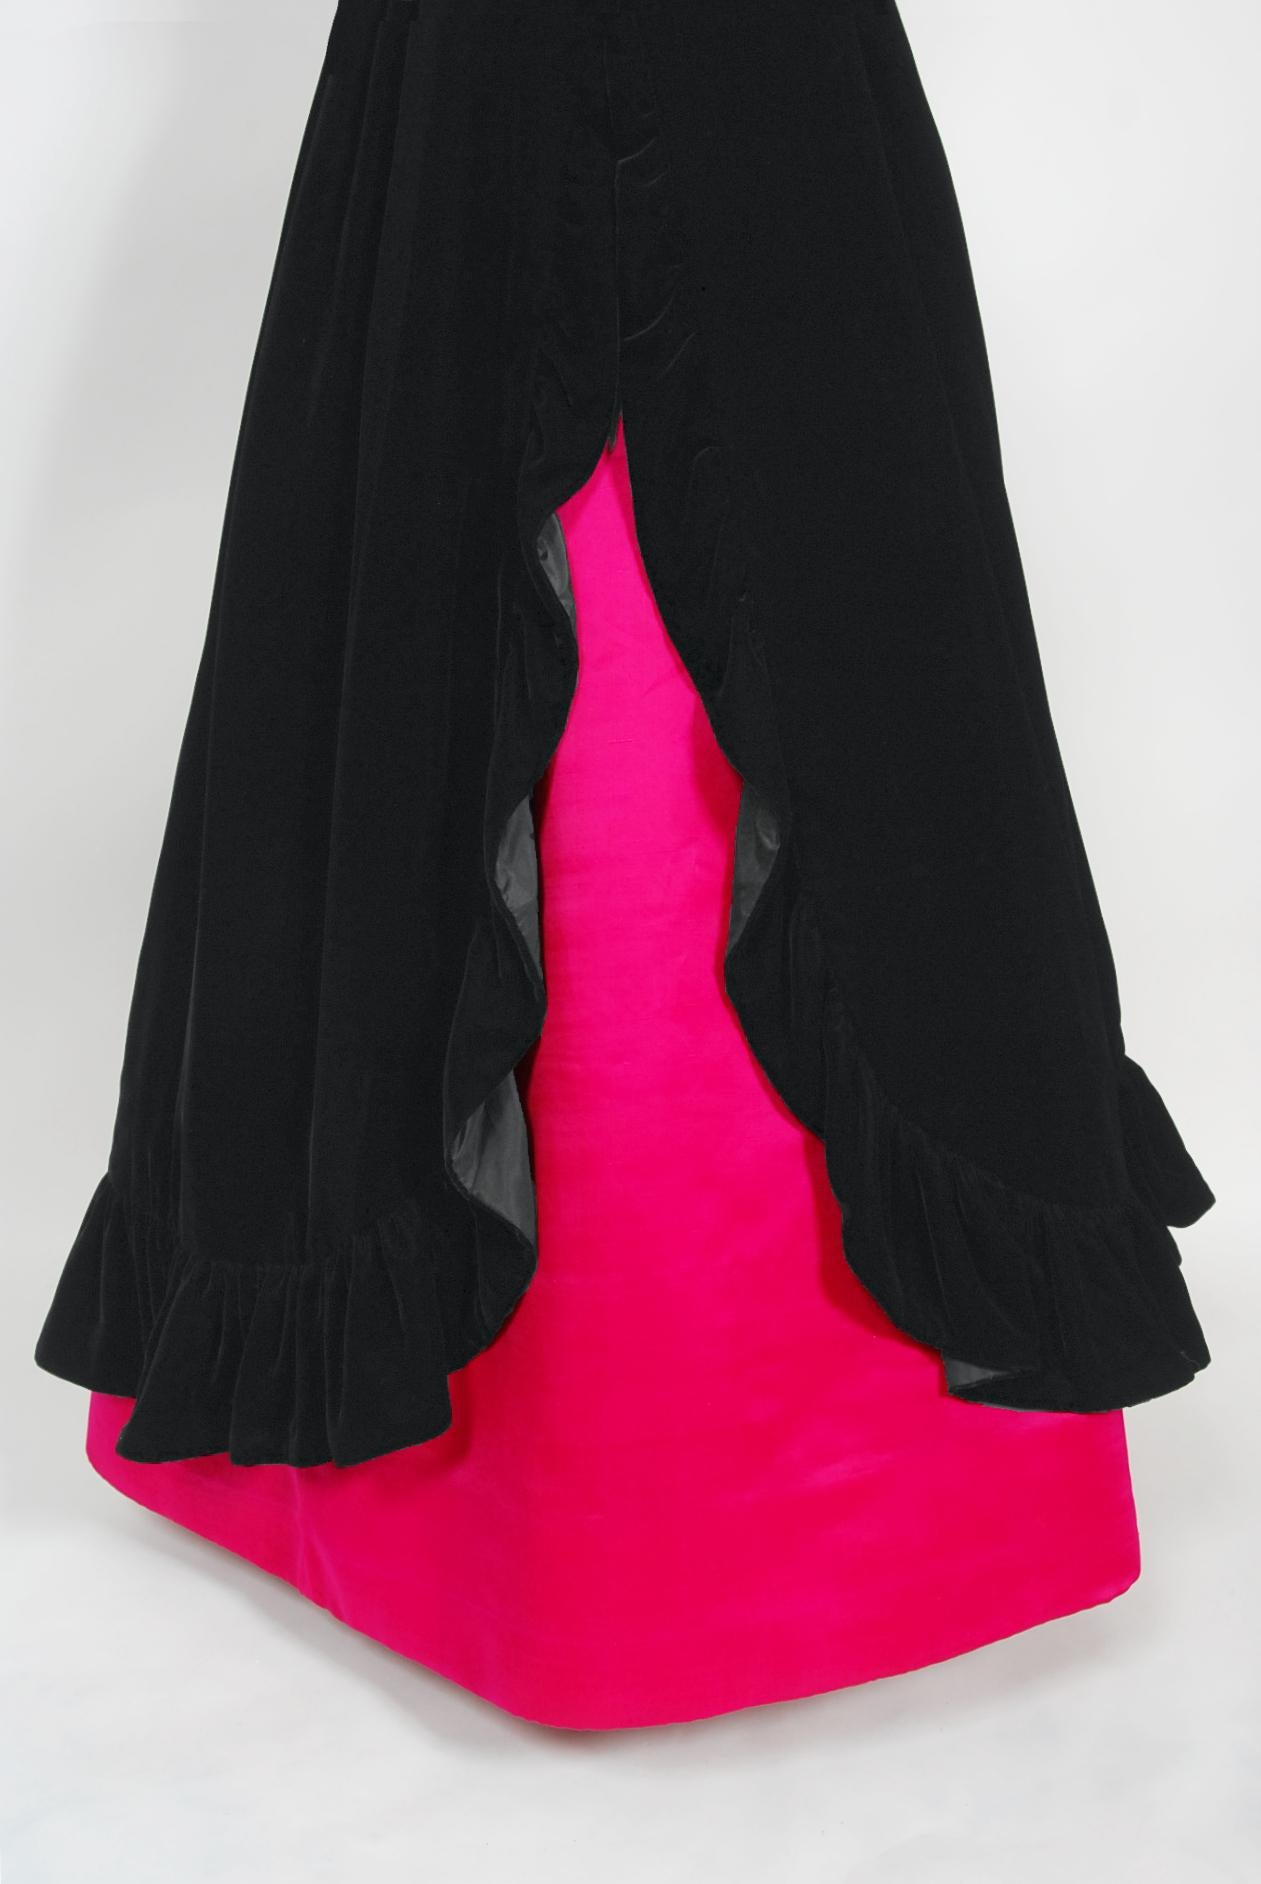 Iconic Vintage Chanel Haute Couture Black Velvet Shocking Pink Silk Halter Gown For Sale 3